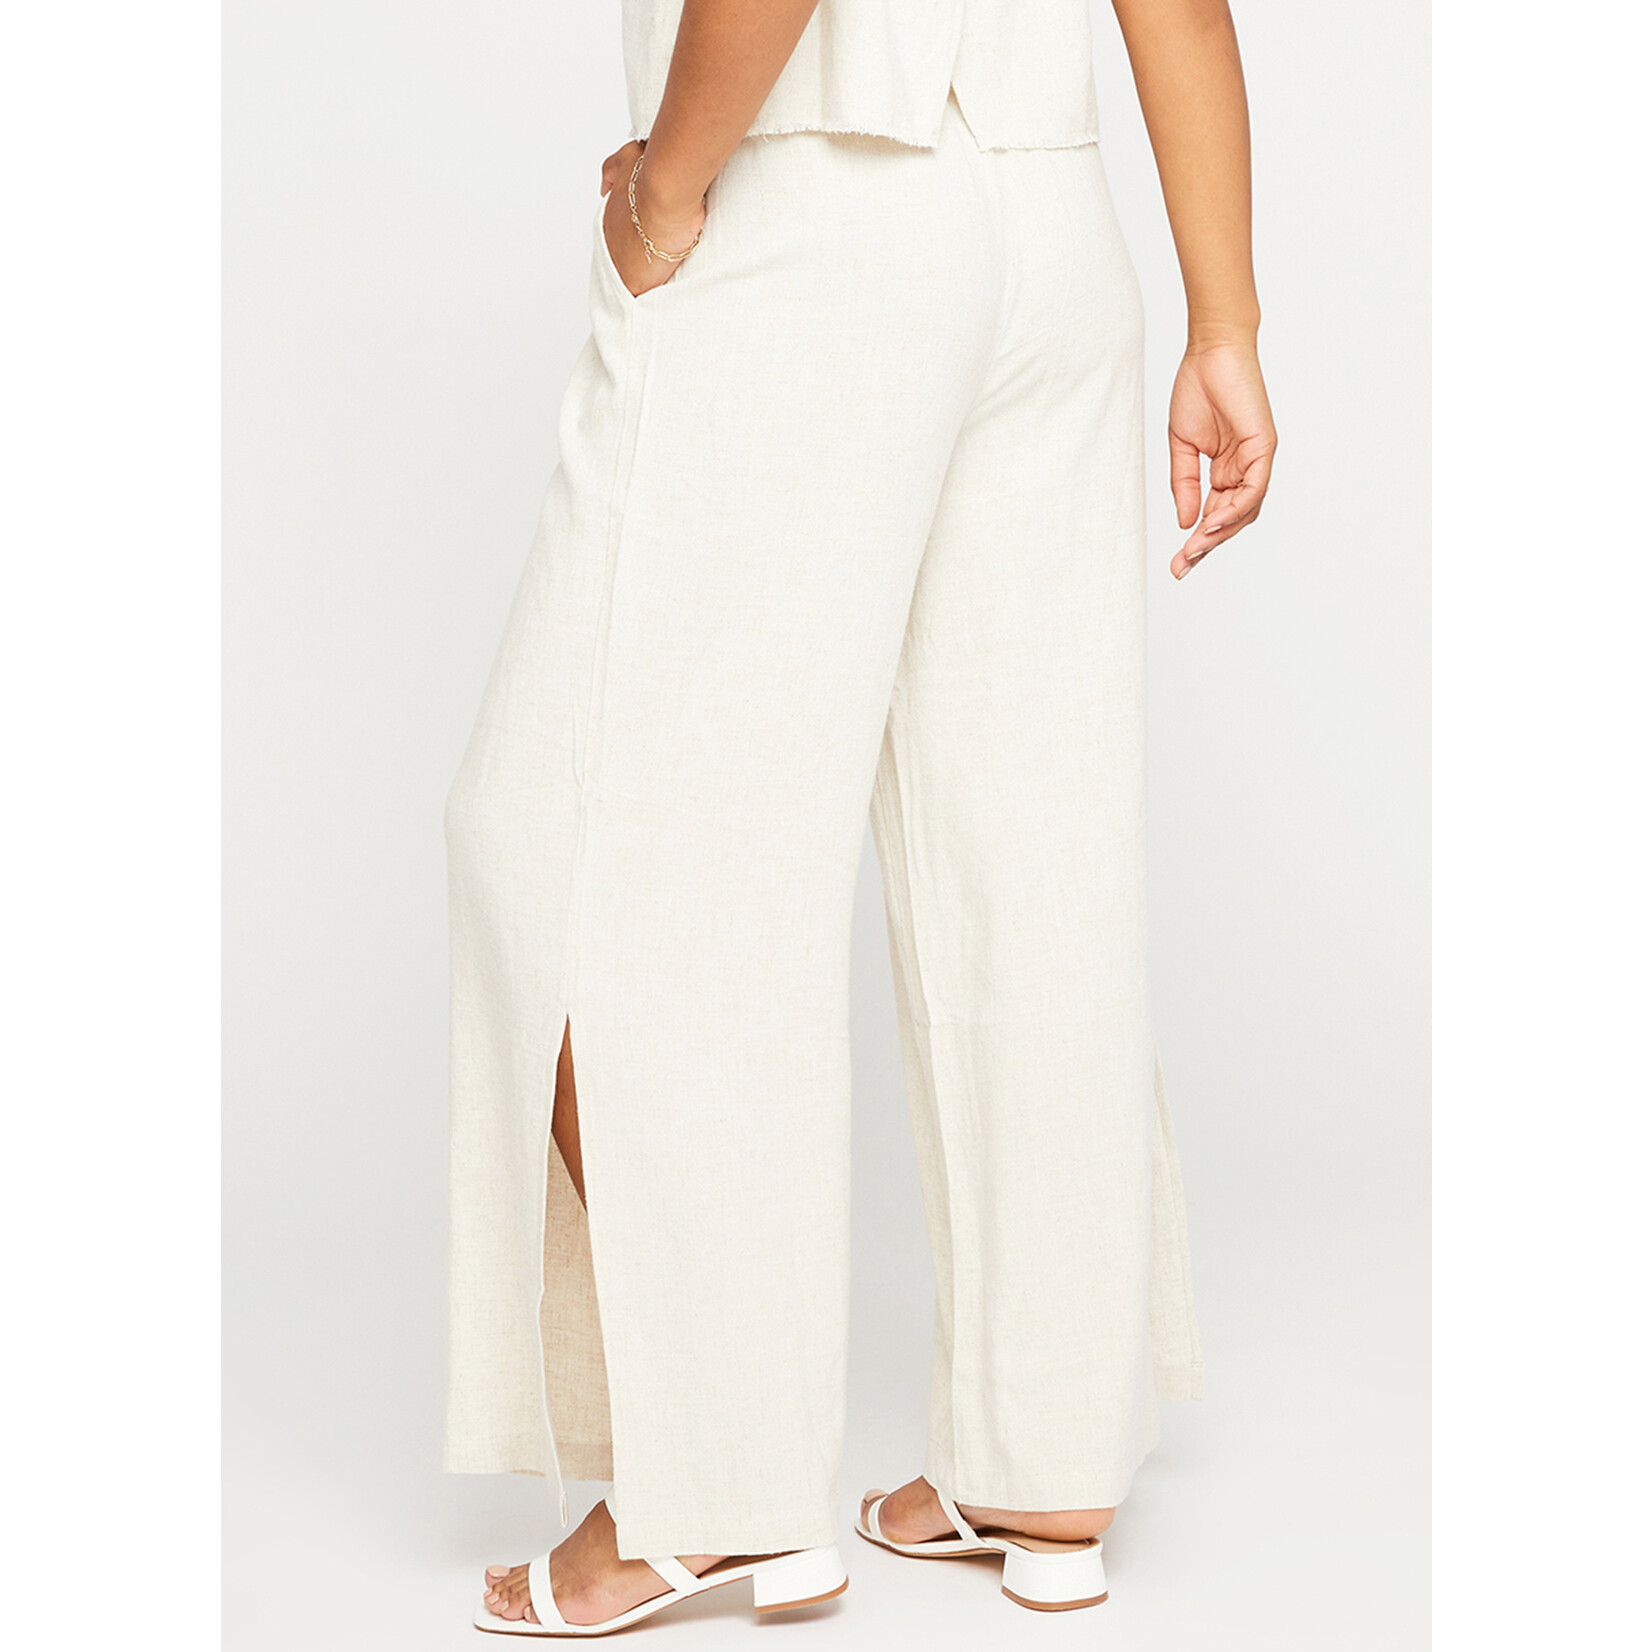 Gentle Fawn Willow pants